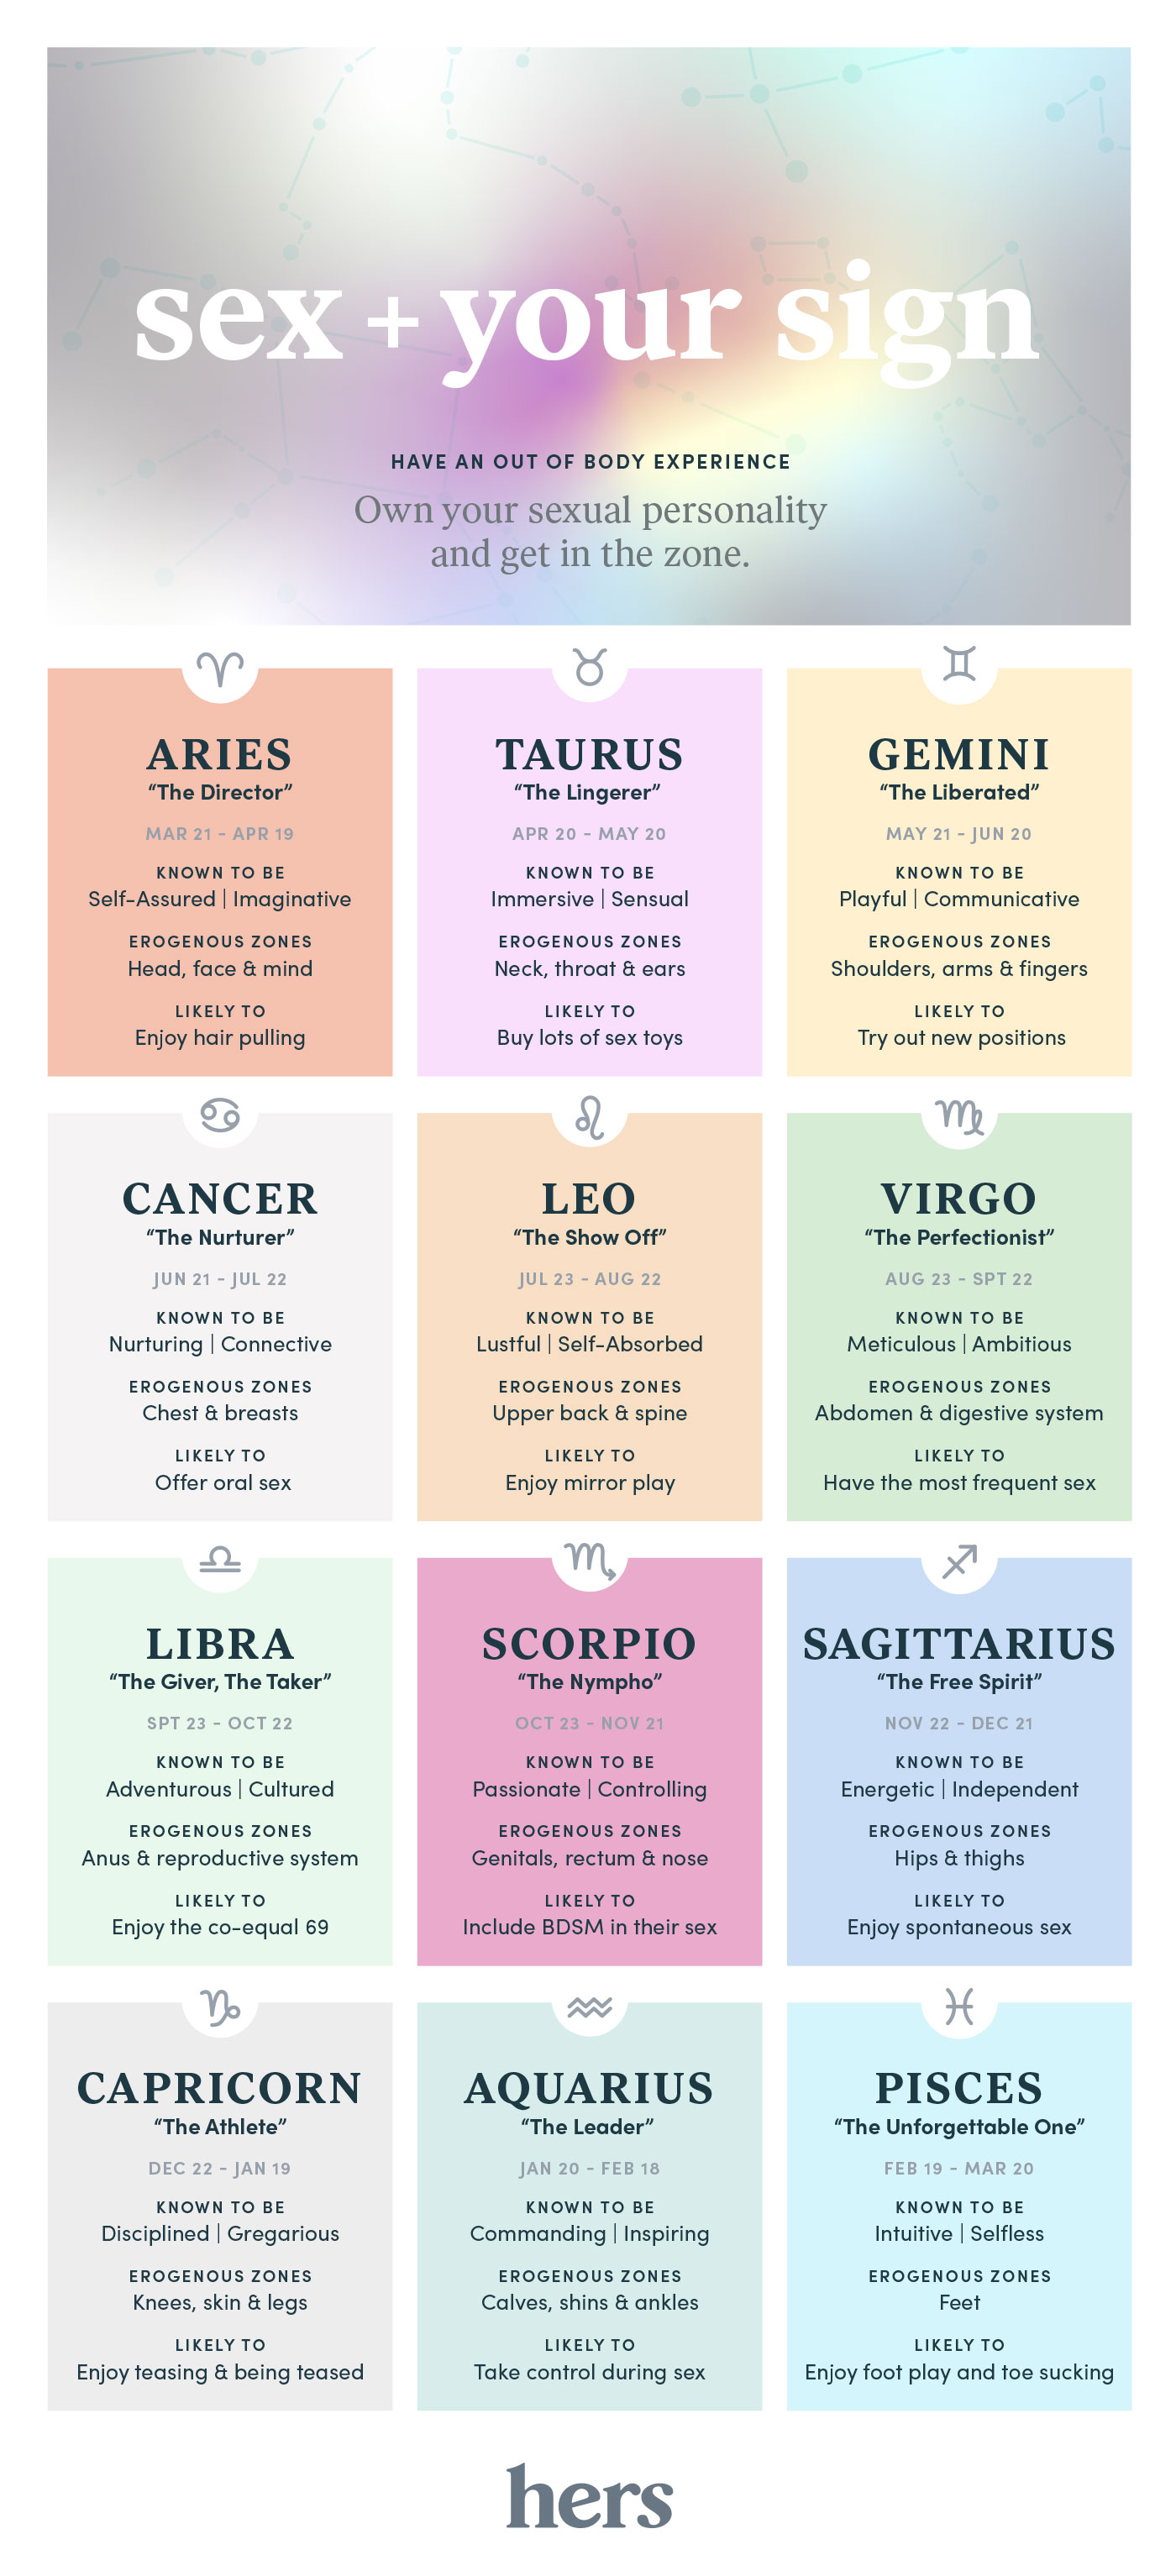 Your Sexual Personality According To Astrology